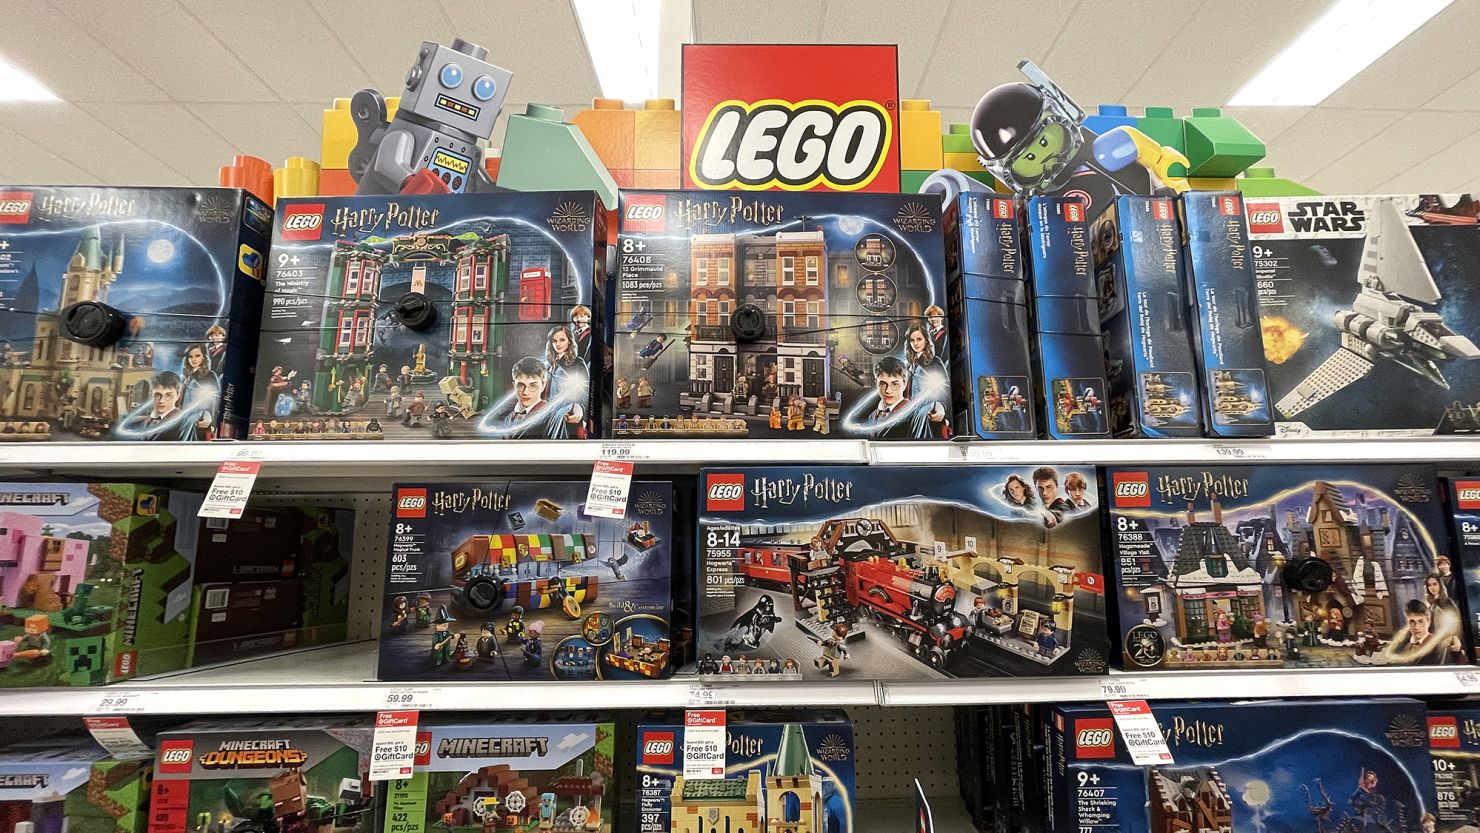 Lego sets are routinely among the most stolen items at retail.